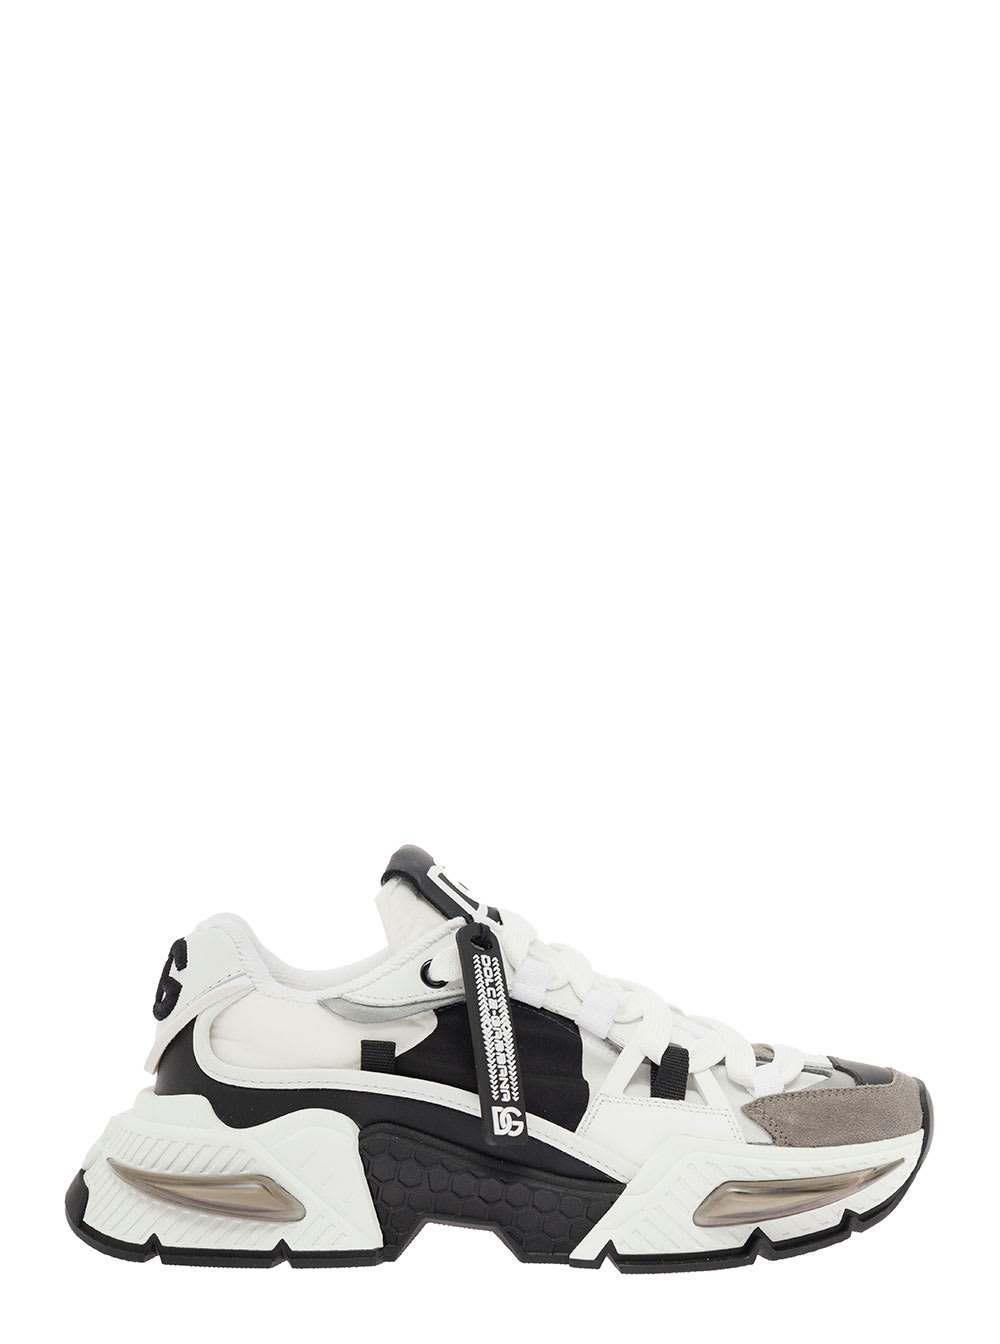 Dolce & Gabbana Womans Mix Of Materials Airmaster Sneakers